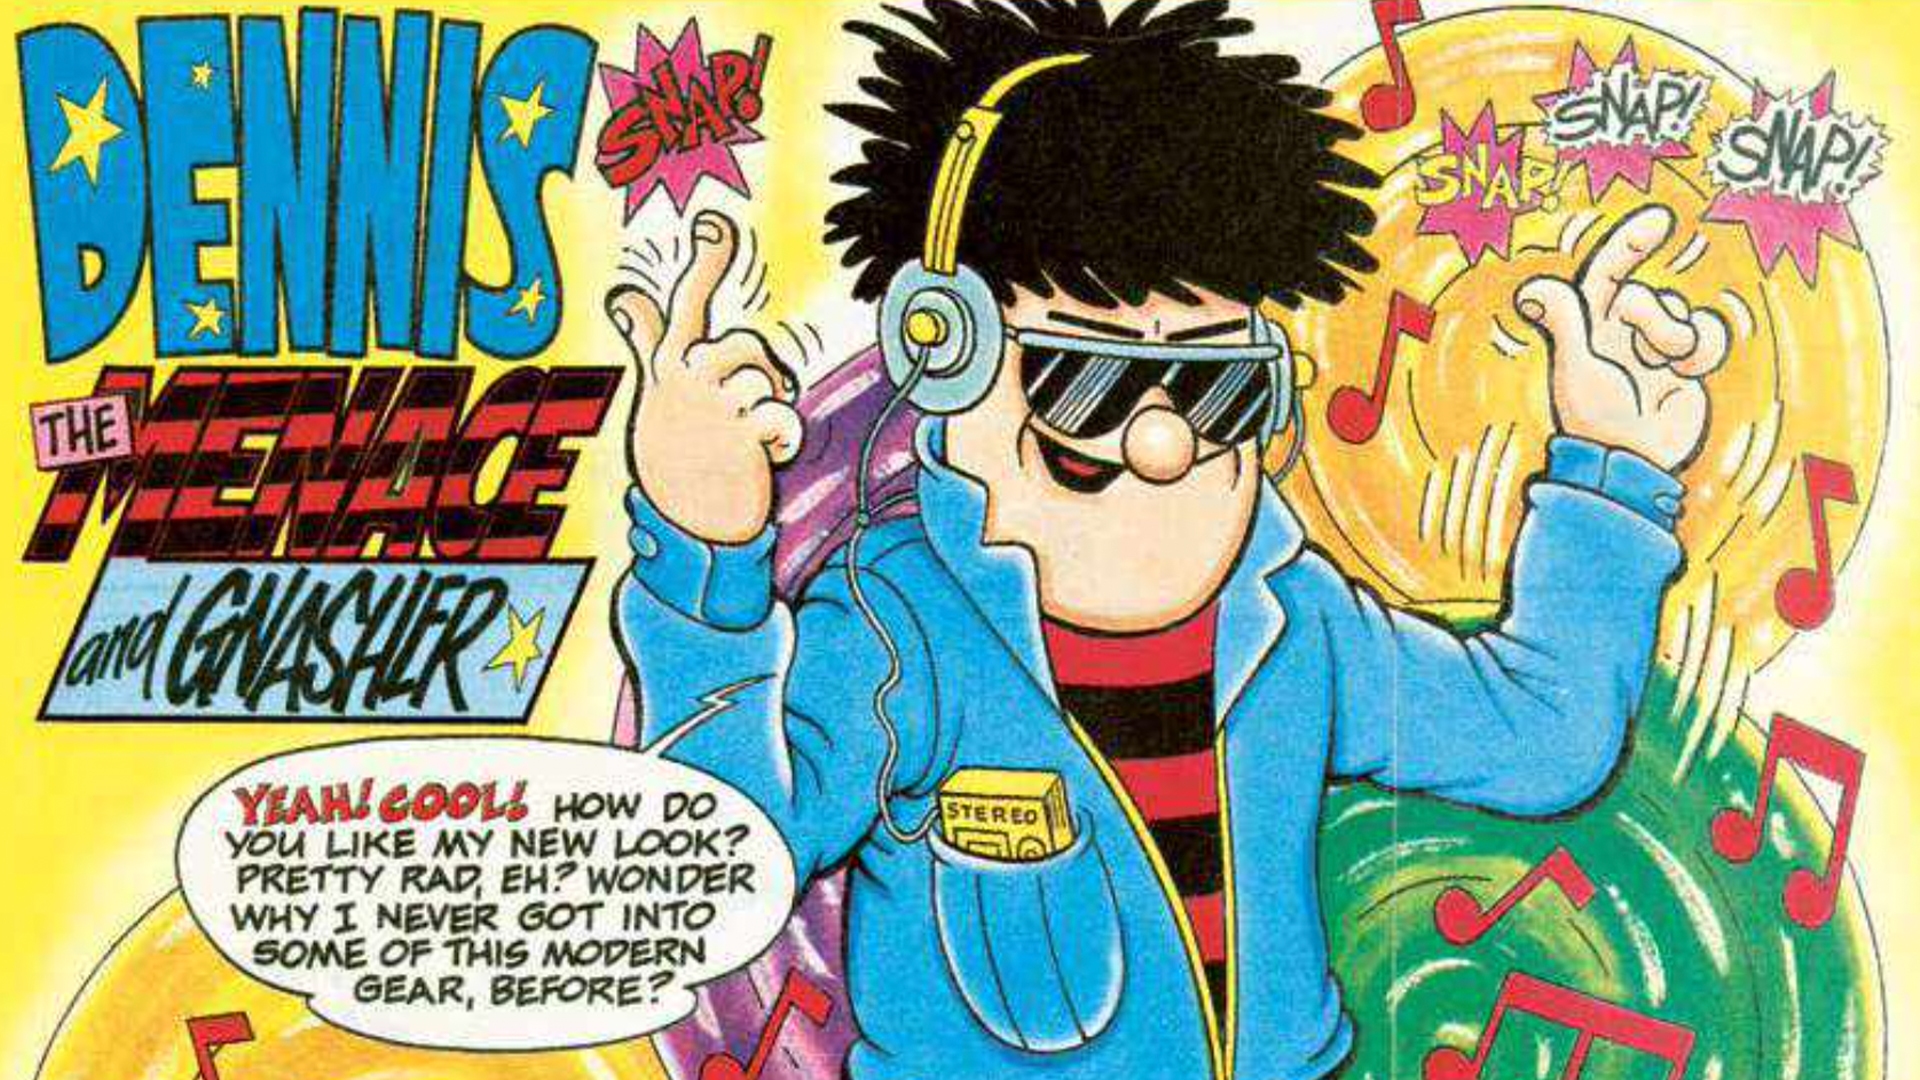 A Beano cover from 1991